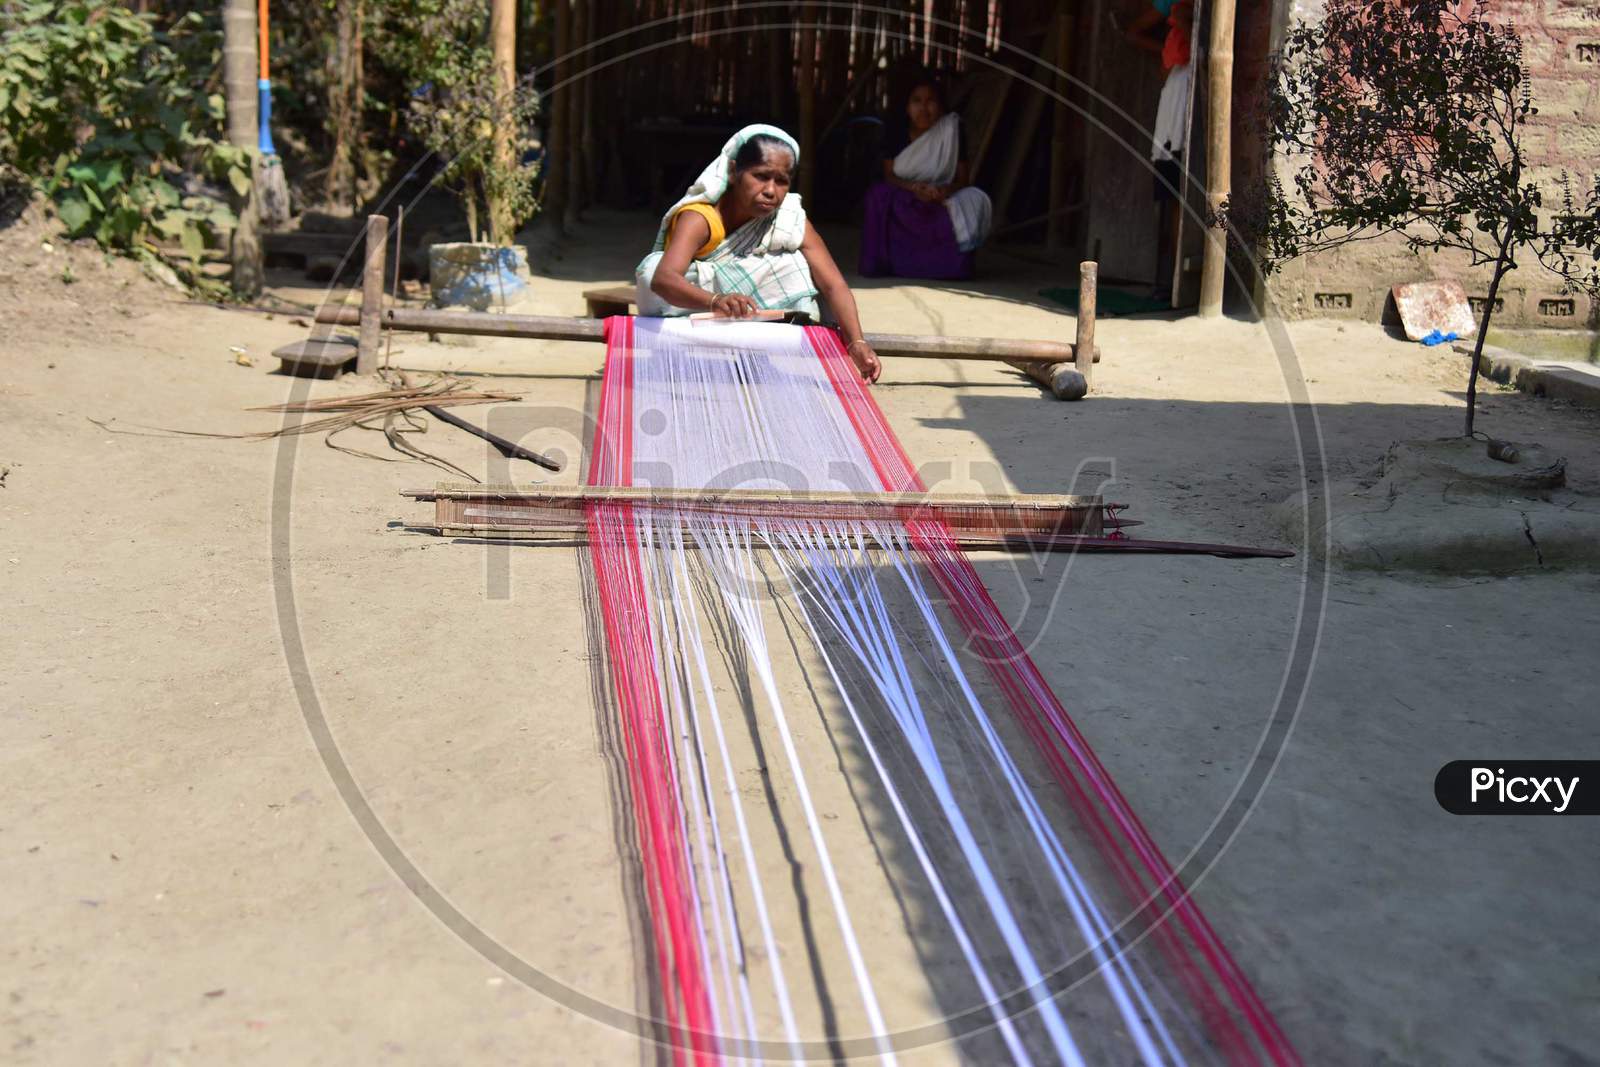 Women Busy In Weaving Traditional Assamese Gamosa Ahead Of Rongali Bihu Festival  During The Nationwide Lockdown Imposed In Wake Of Coronavirus Pandemic, In Nagaon District Of Assam On April 02,2020